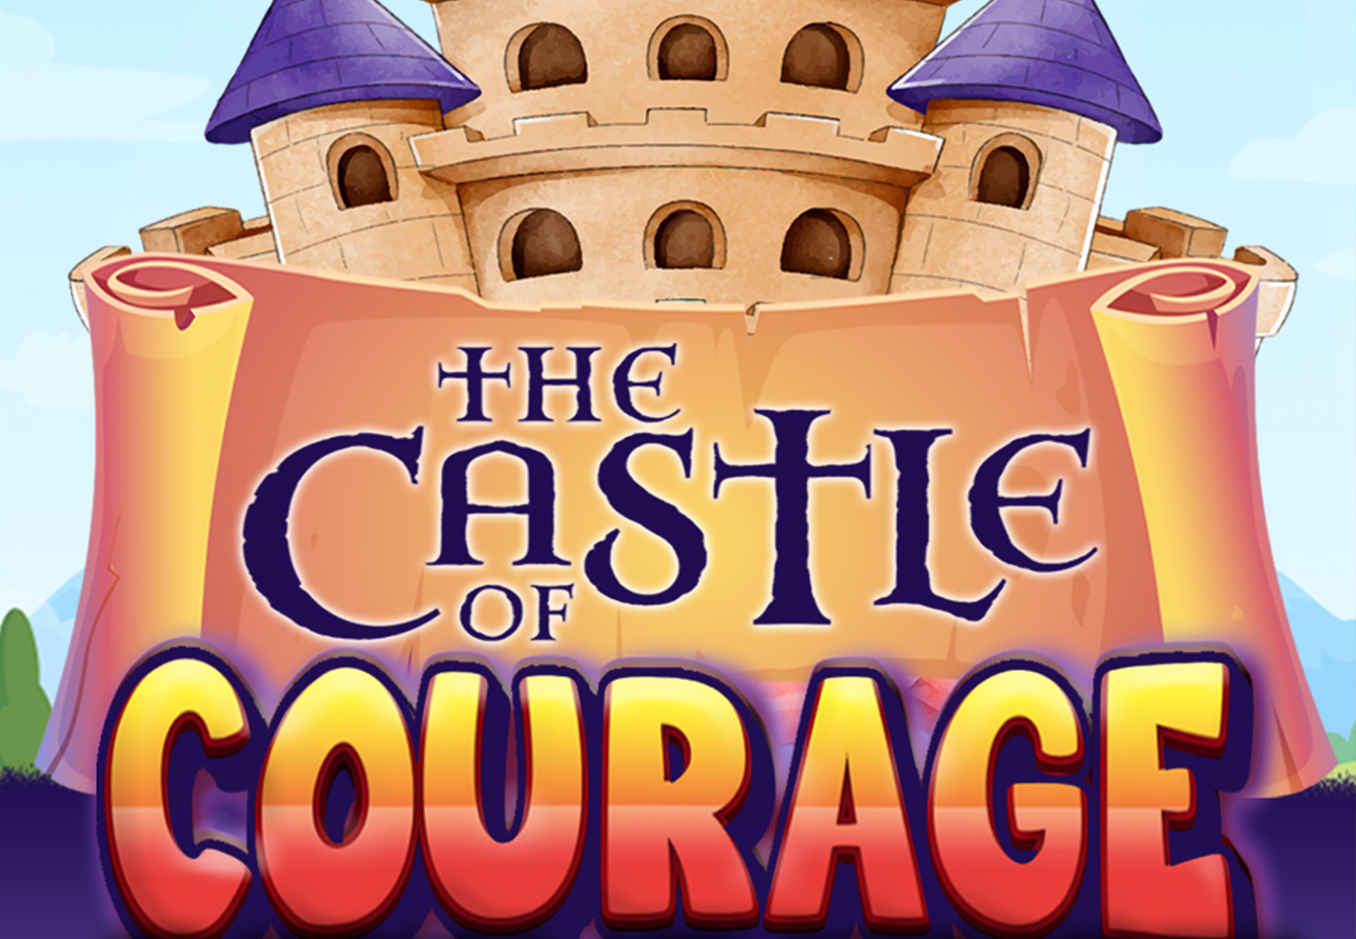 Castle of Courage 5-Day VBS Curriculum